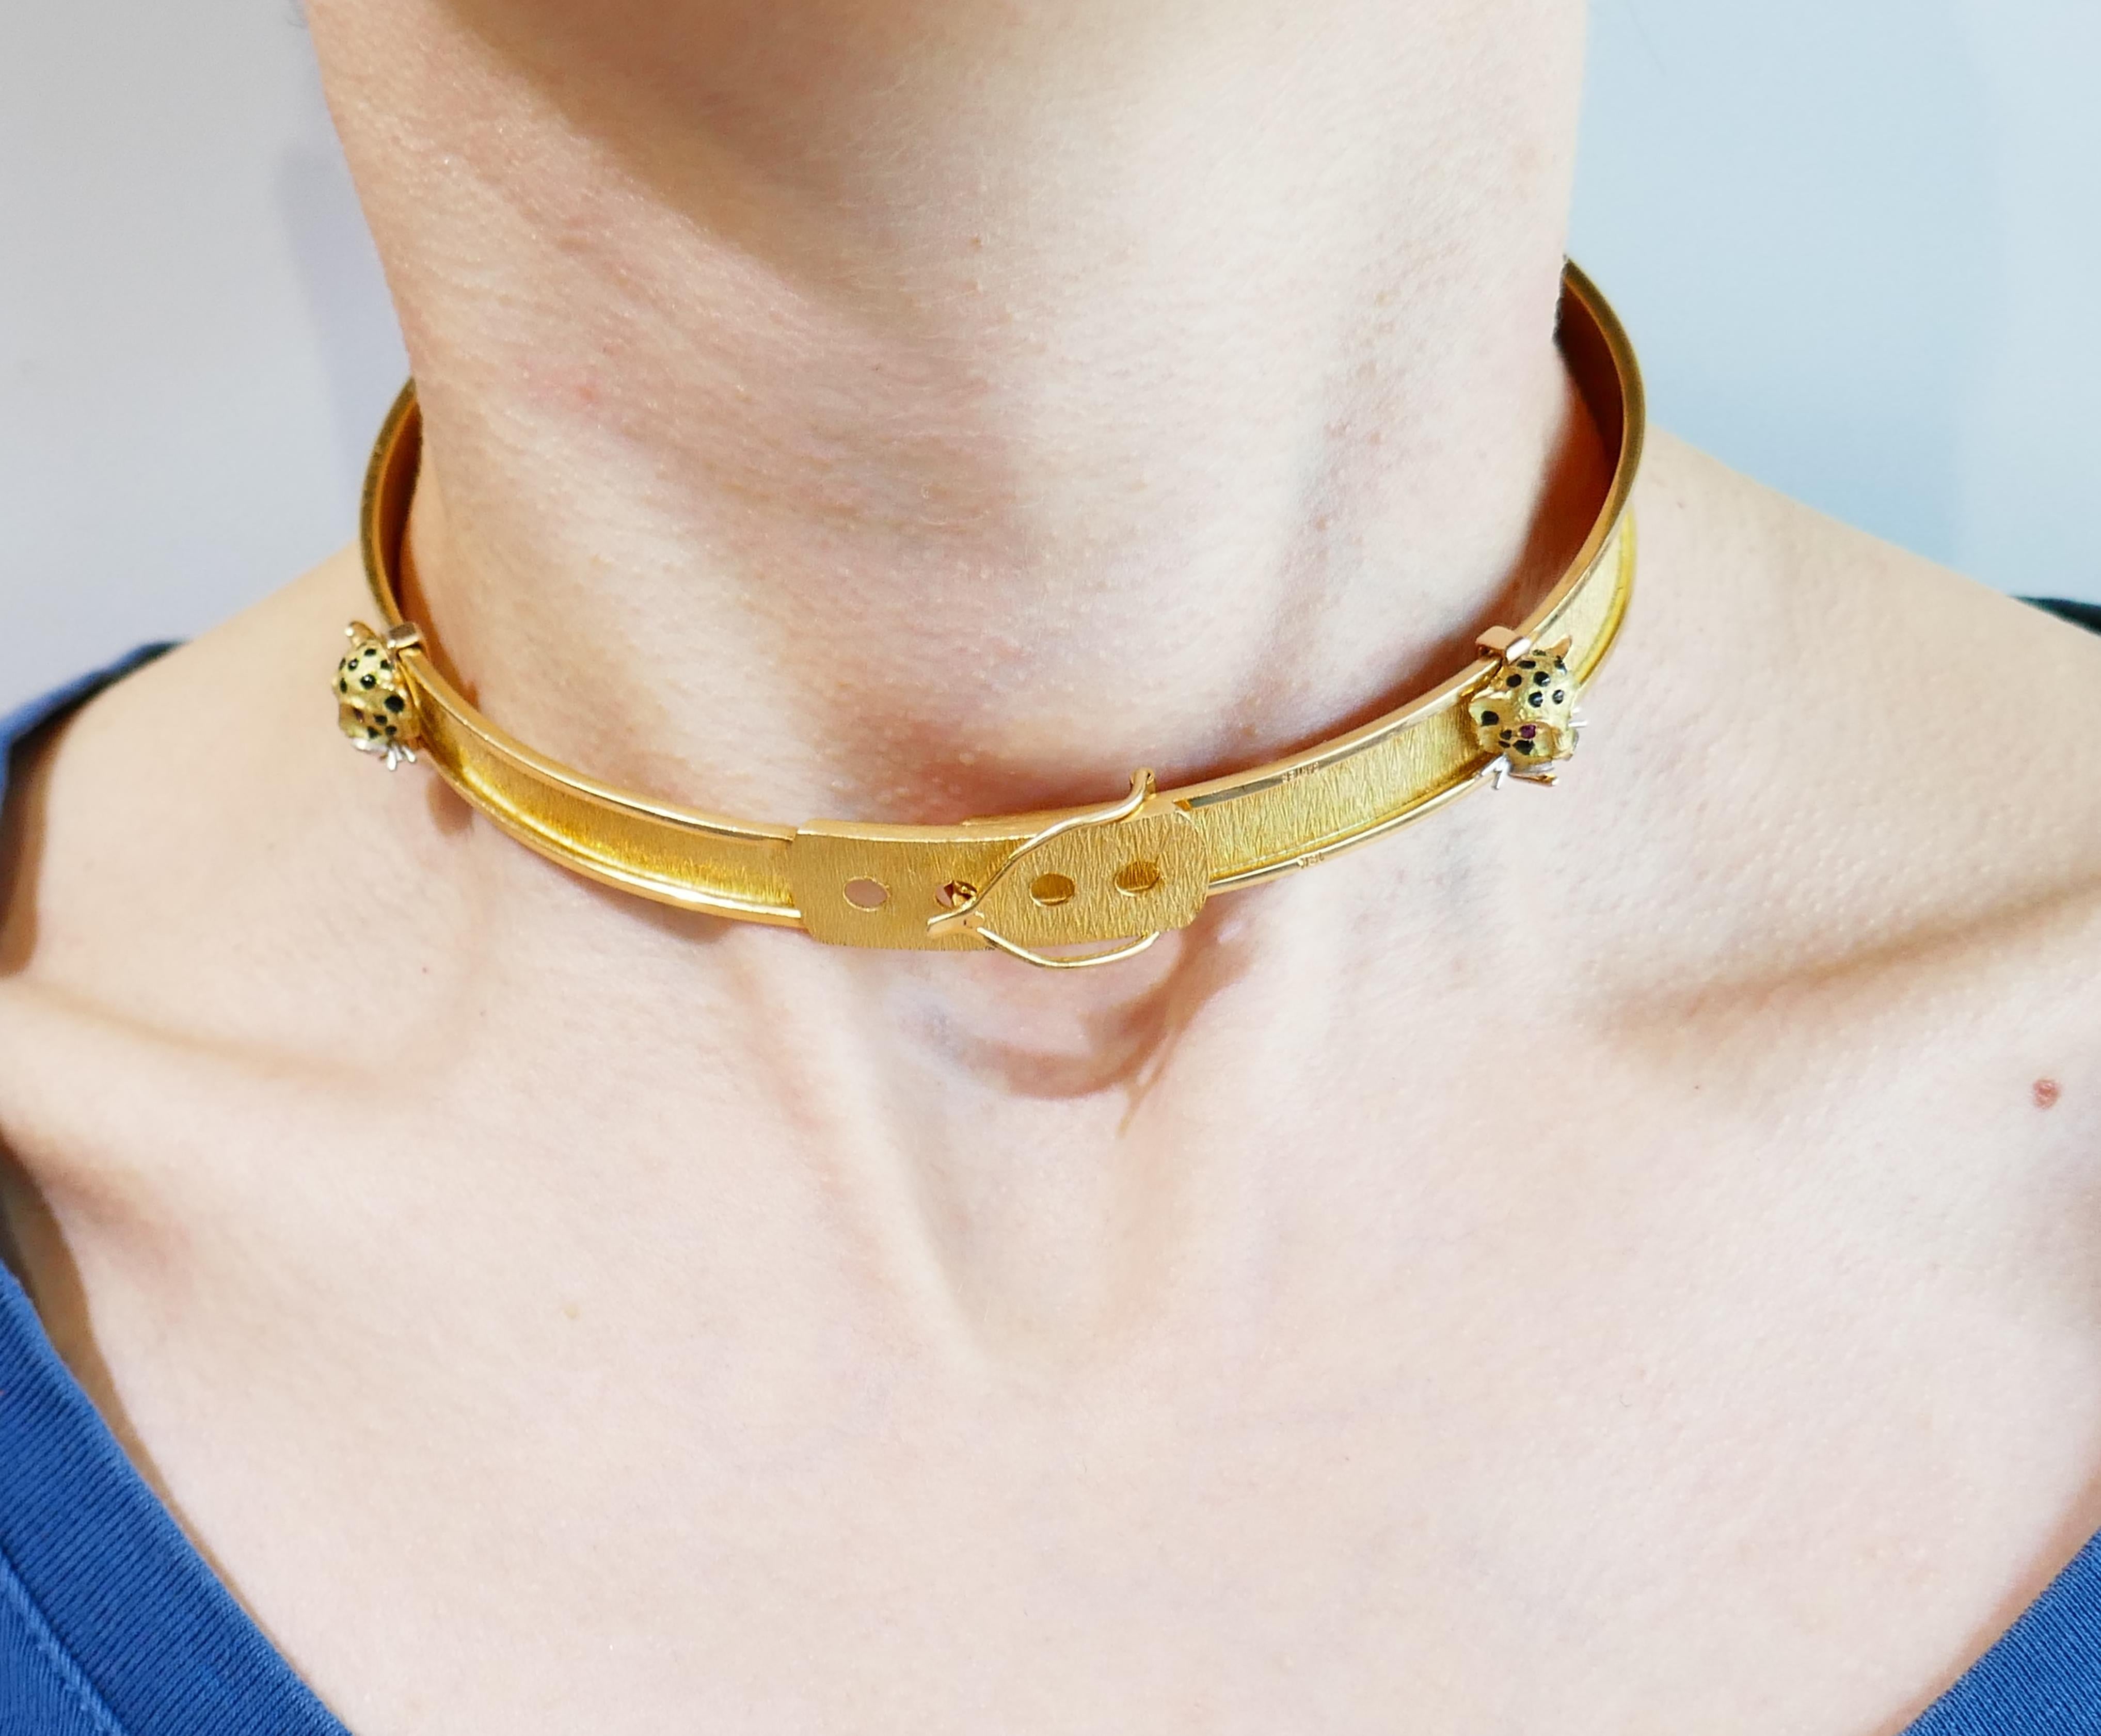 Cute and fun choker necklace created by Cartier in the 1970s. Chic and wearable, the necklace is a great addition to your jewelry collection.
The necklace is made of 18k yellow gold and features two sliding panther heads on the sides of a stylized